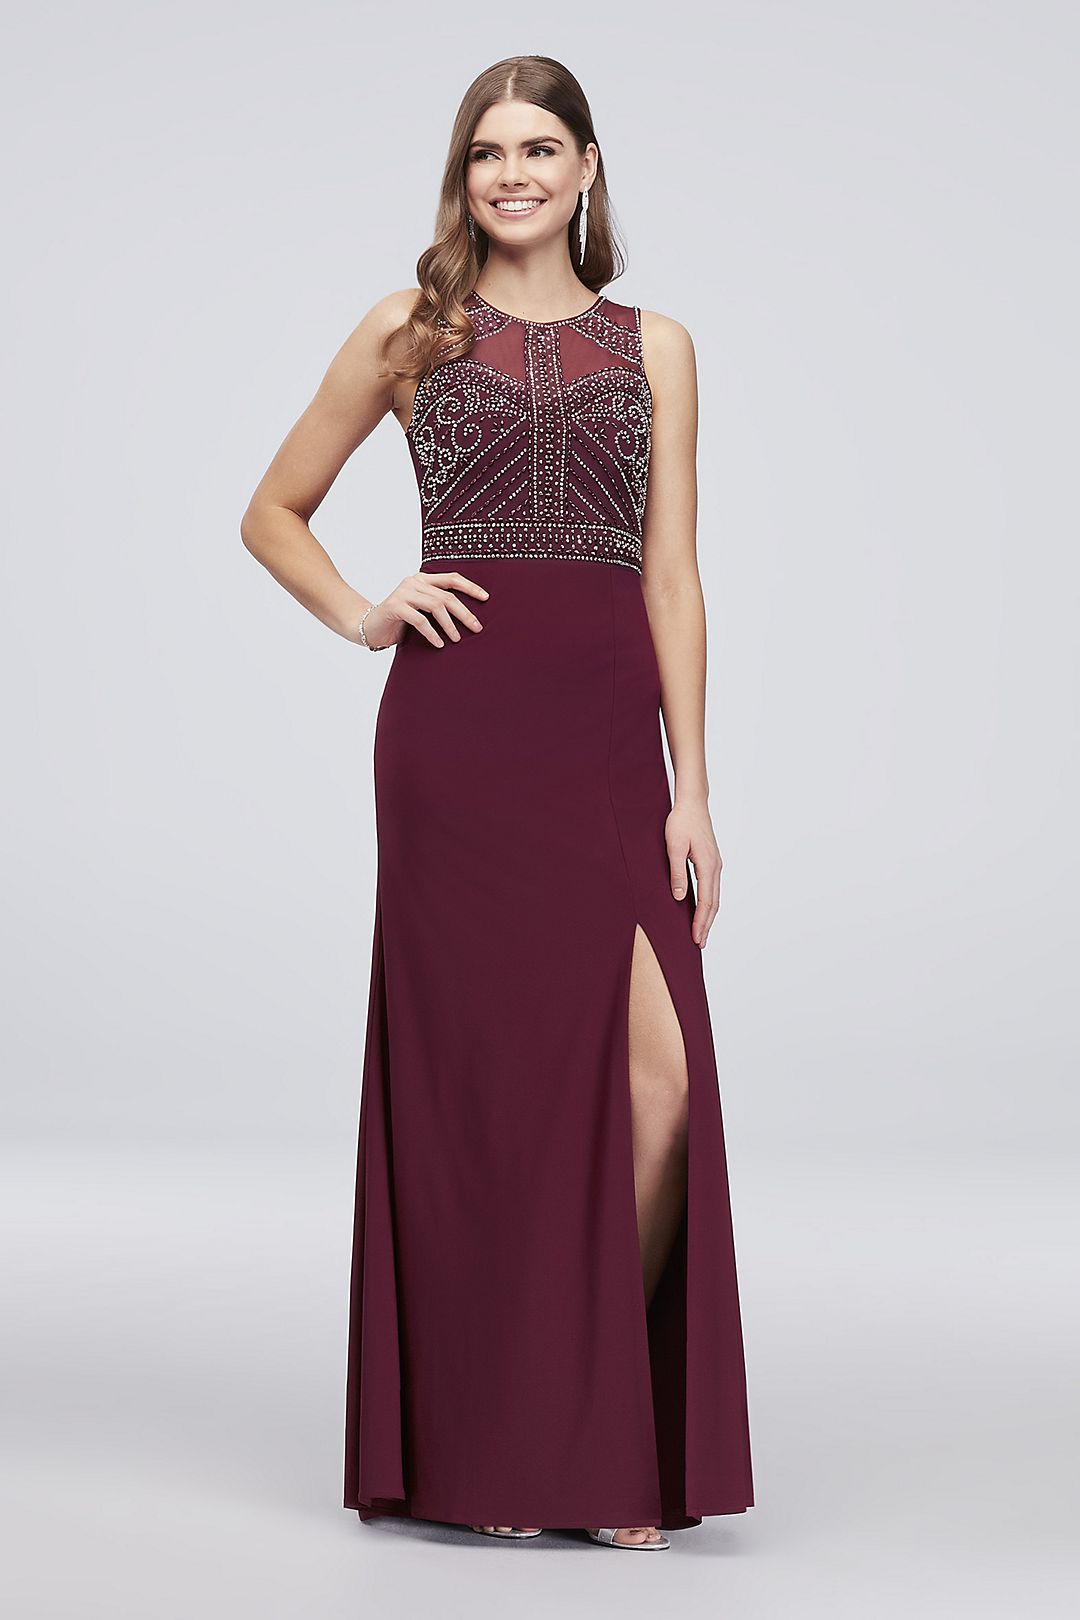 Beaded Jersey Tank Dress with Illusion Back Image 1